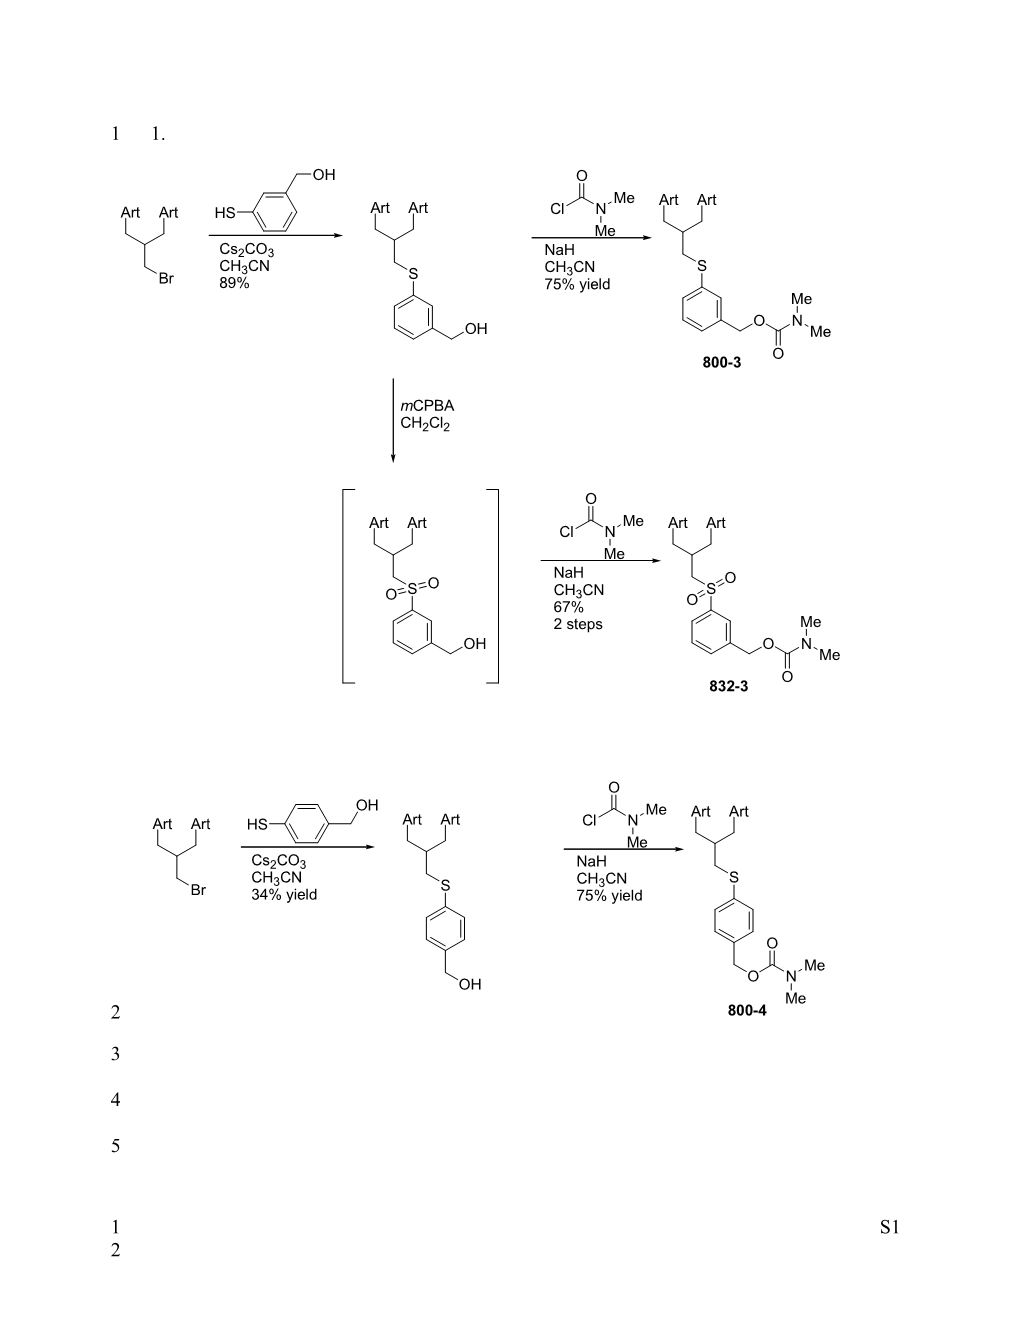 Synthesis of Dimer Sulfide 3-Benzylic Alcohol